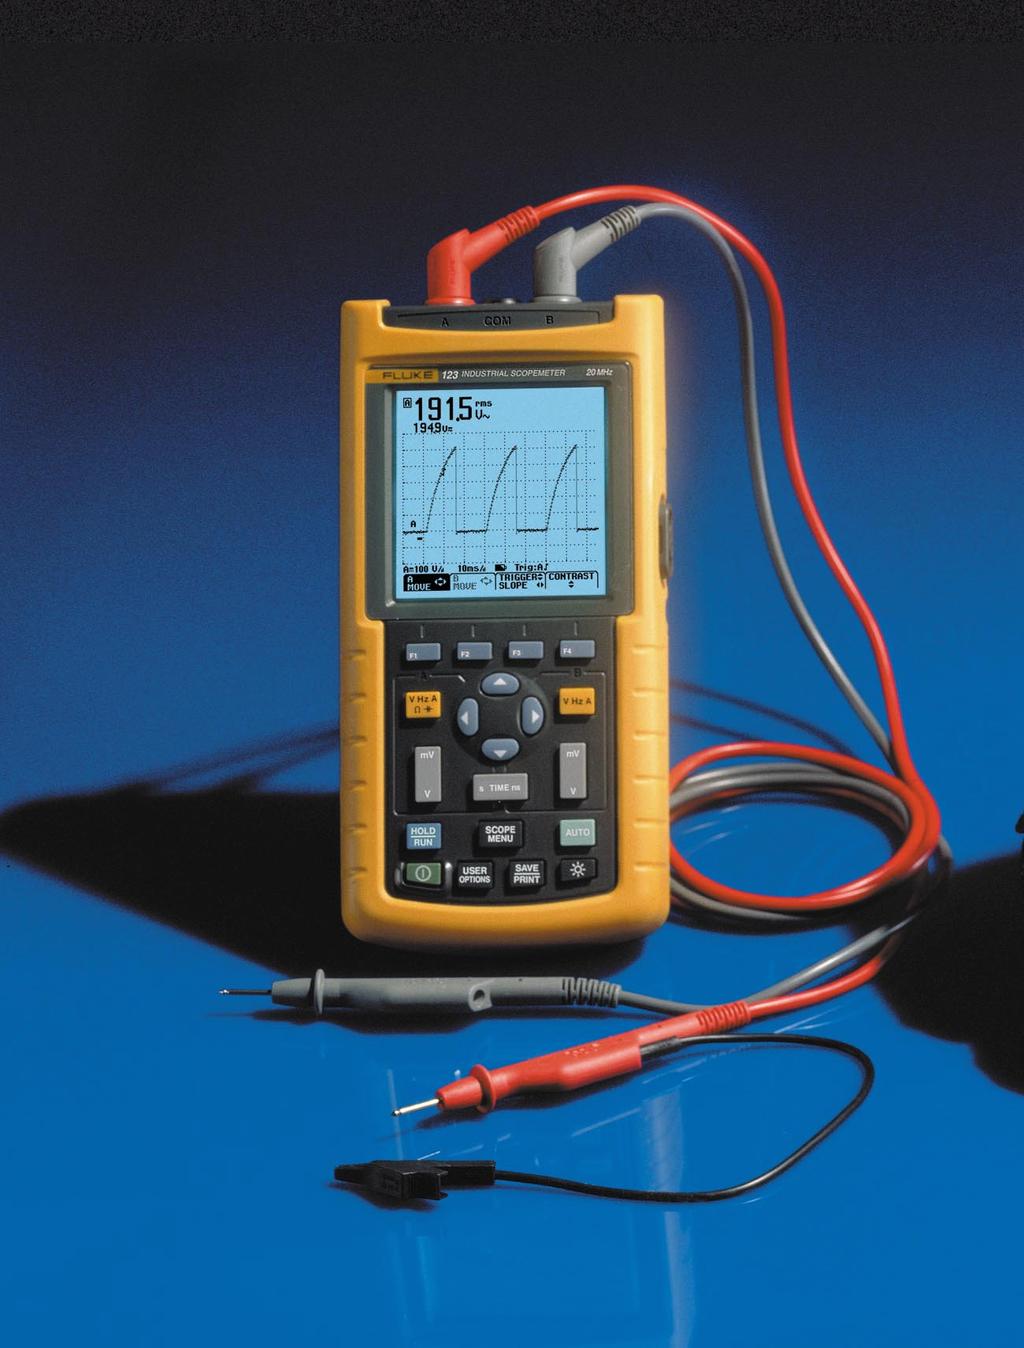 Oscilloscopes for field applications ScopeMeter 123: Three-in-one simplicity The compact ScopeMeter 123 is the rugged solution for industrial troubleshooting and